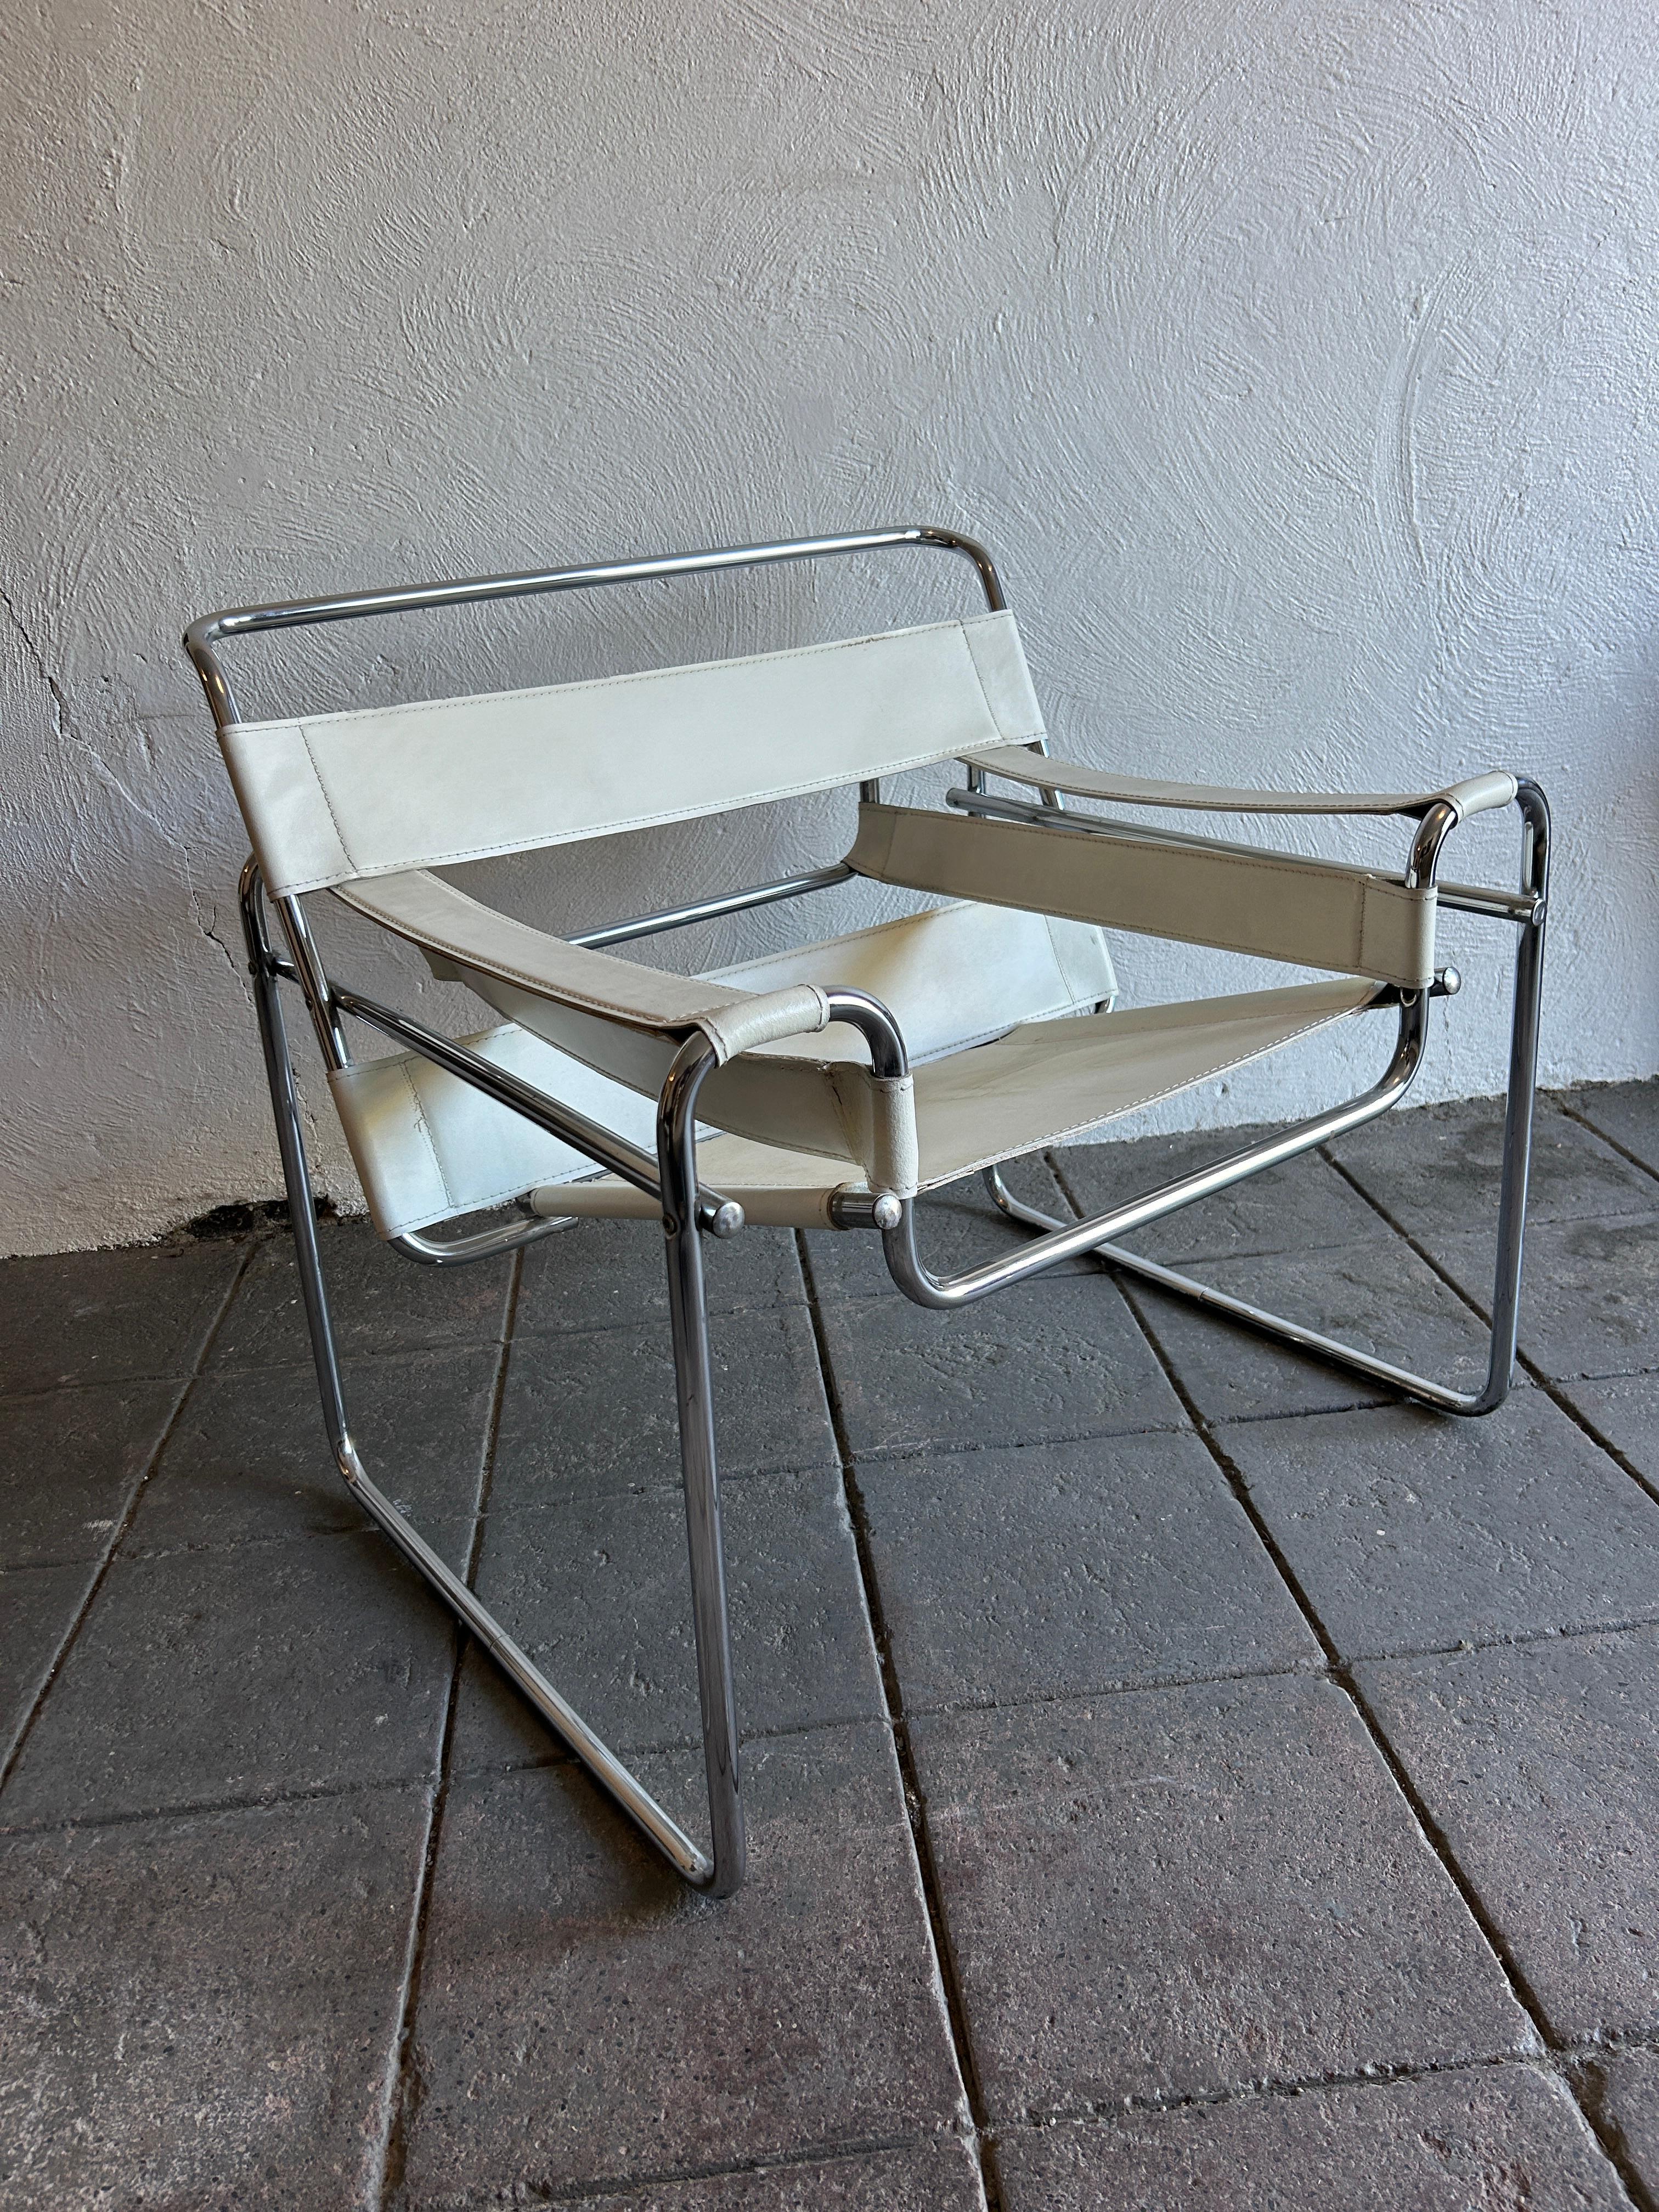 Vintage mid century post modern Wassily lounge chair in the style of knoll and designs by Marcel Breuer in white full leather. This vintage chair circa 1980s chrome is good and white leather is thick and tight with good stitching. Good example high